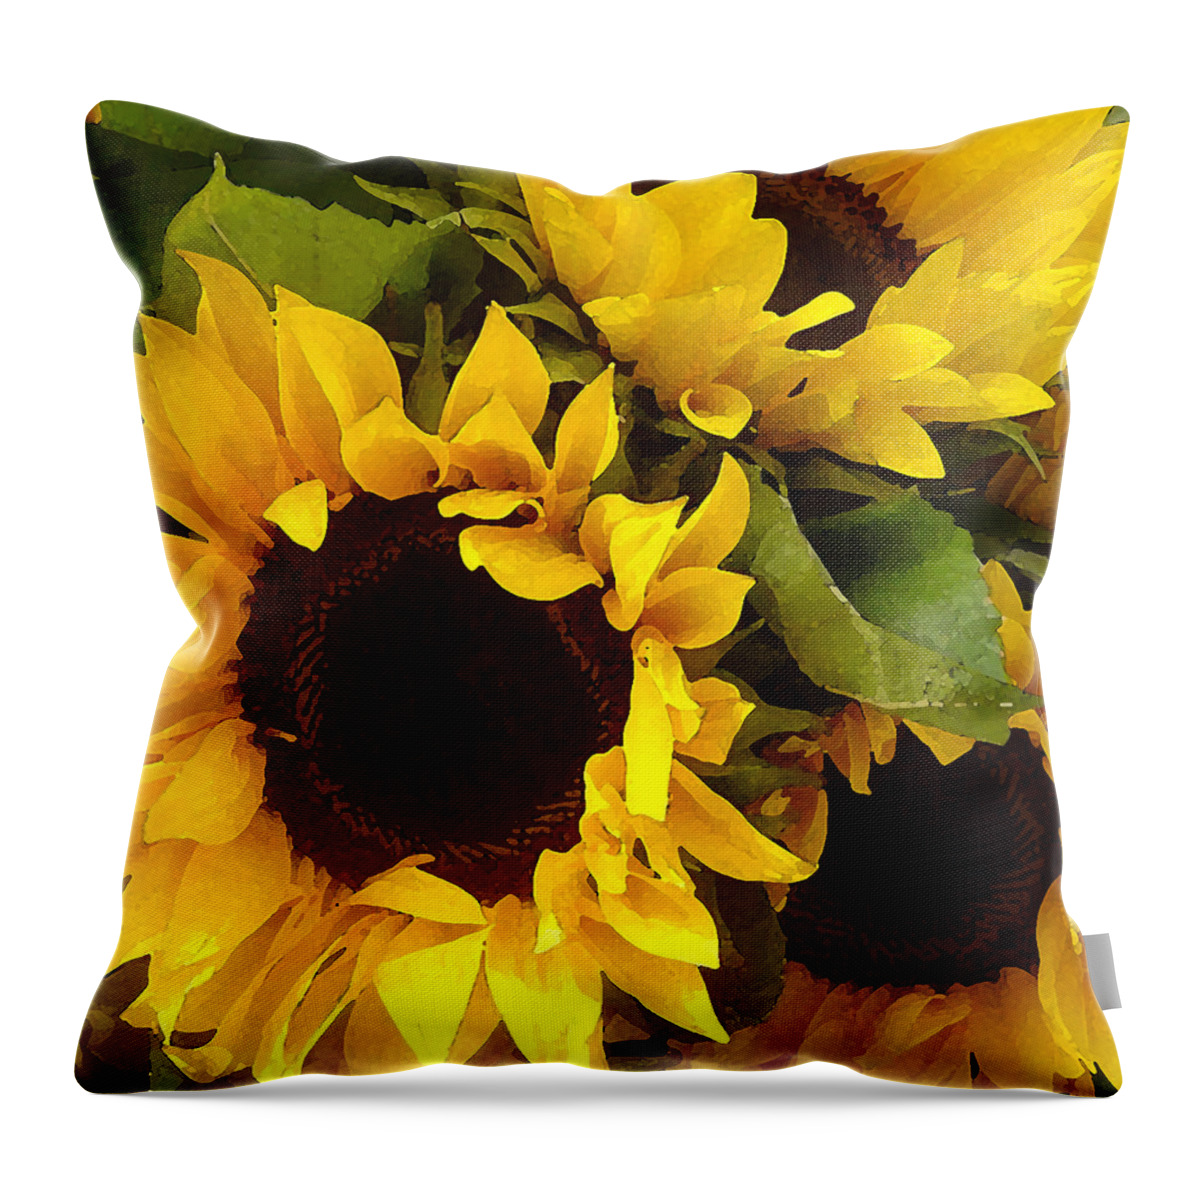 Sunflowers Throw Pillow featuring the painting Sunflowers by Amy Vangsgard